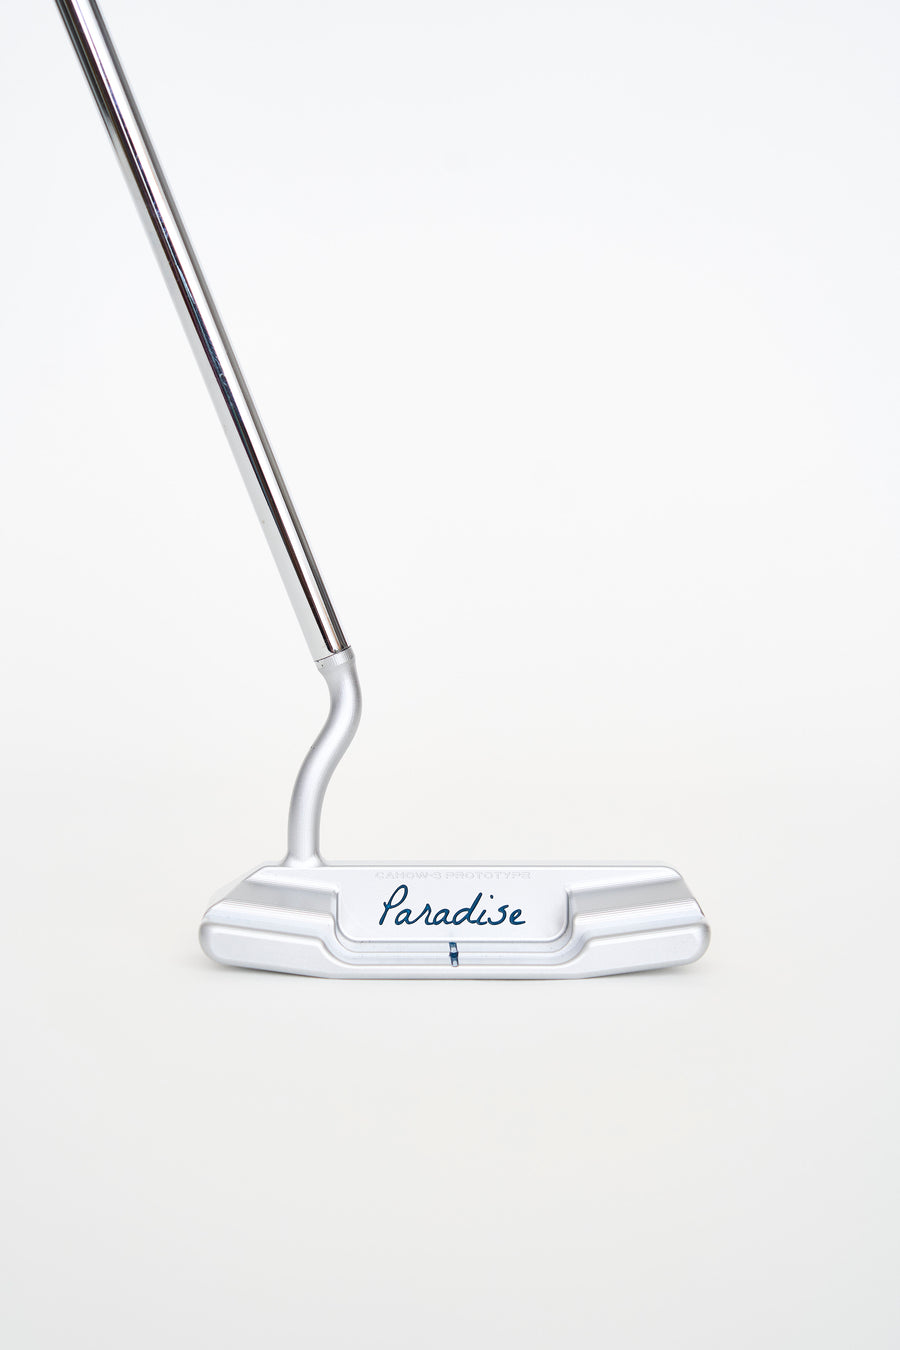 Cahow-S Putter